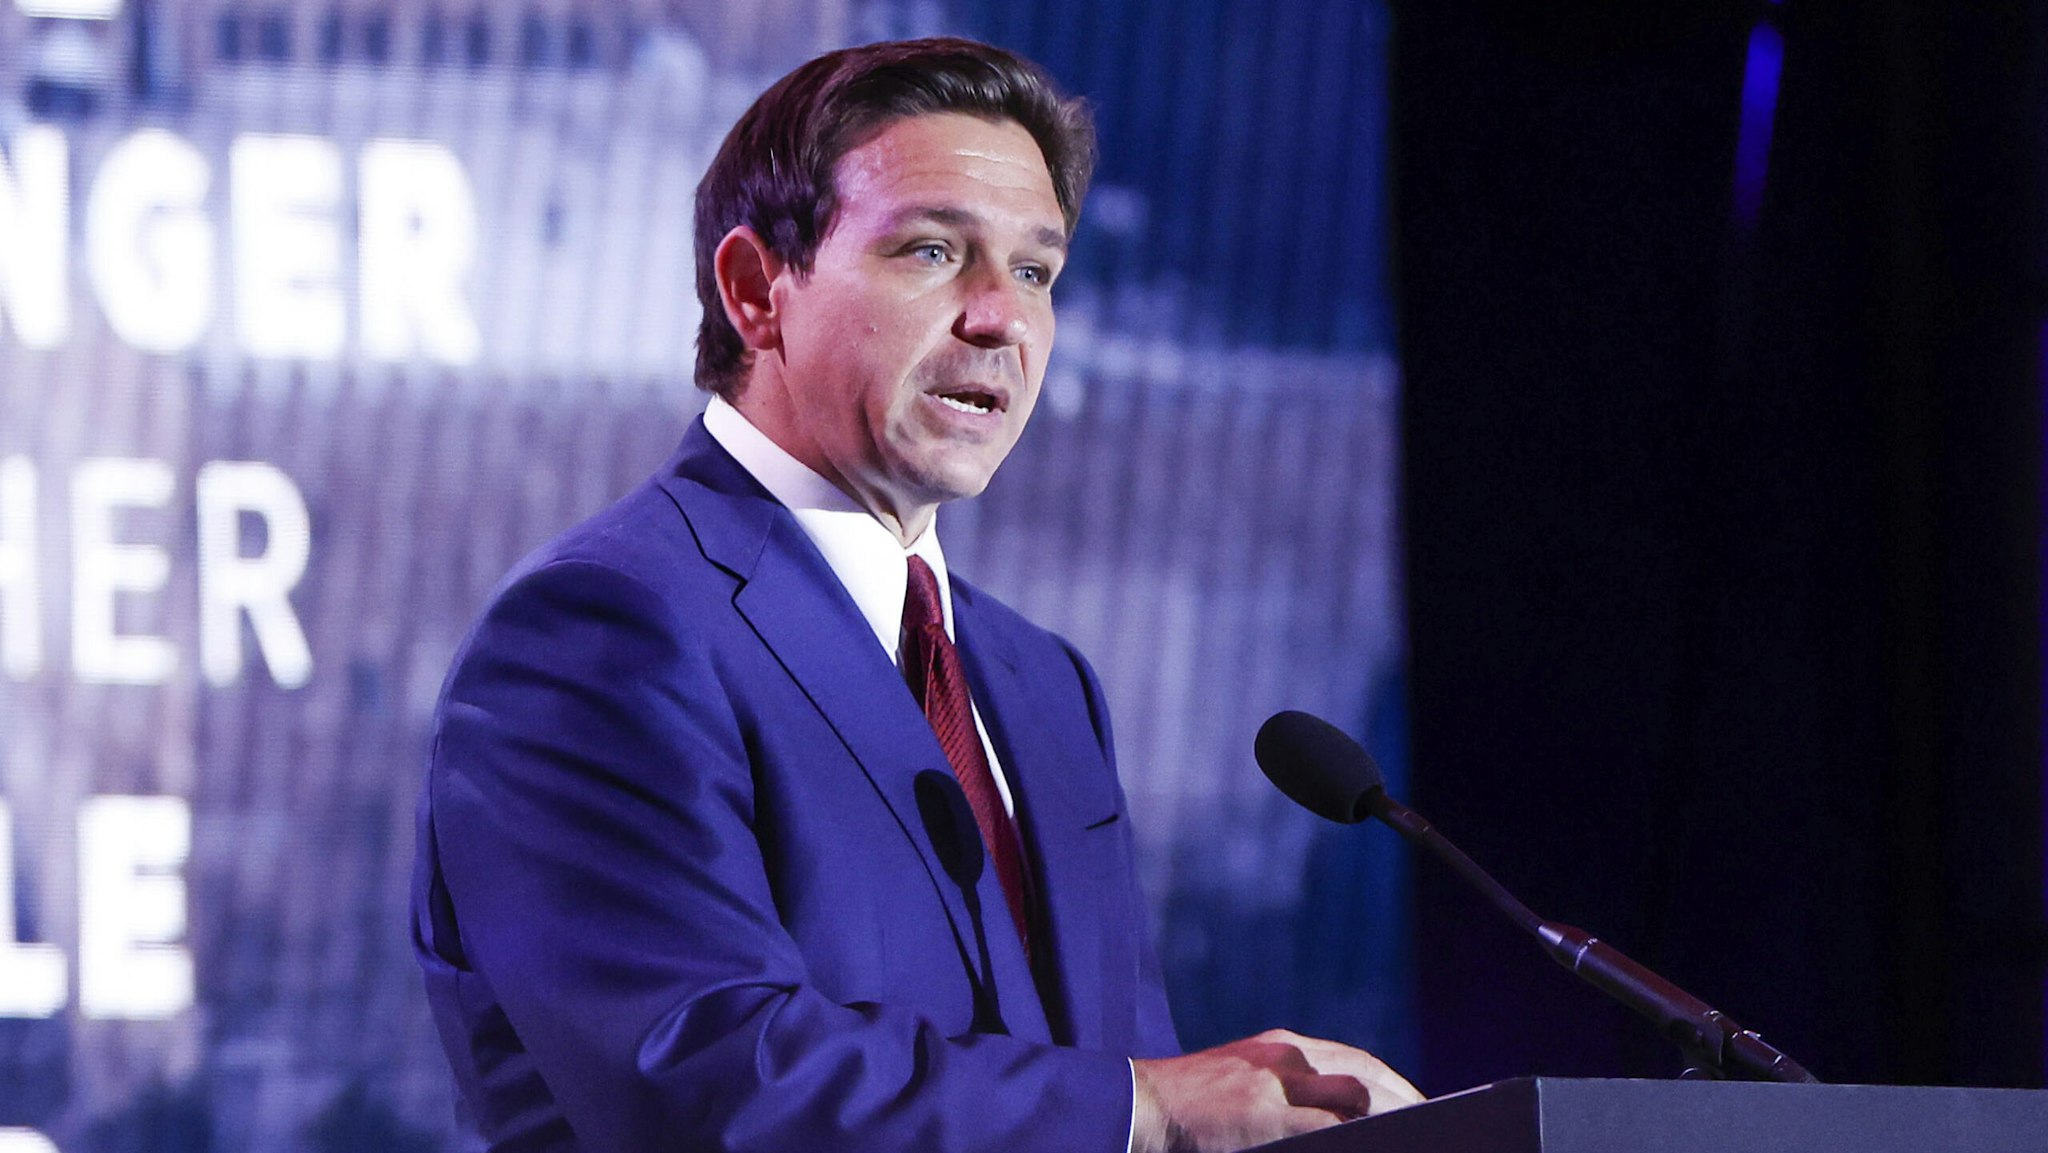 ARLINGTON, VIRGINIA - JULY 17: Republican presidential candidate Florida Governor Ron DeSantis delivers remarks at the 2023 Christians United for Israel summit on July 17, 2023 in Arlington, Virginia. For this year's summit, CUFI hosts 2024 Republican presidential candidates hopefuls to speak amidst other pro-Israel activists.